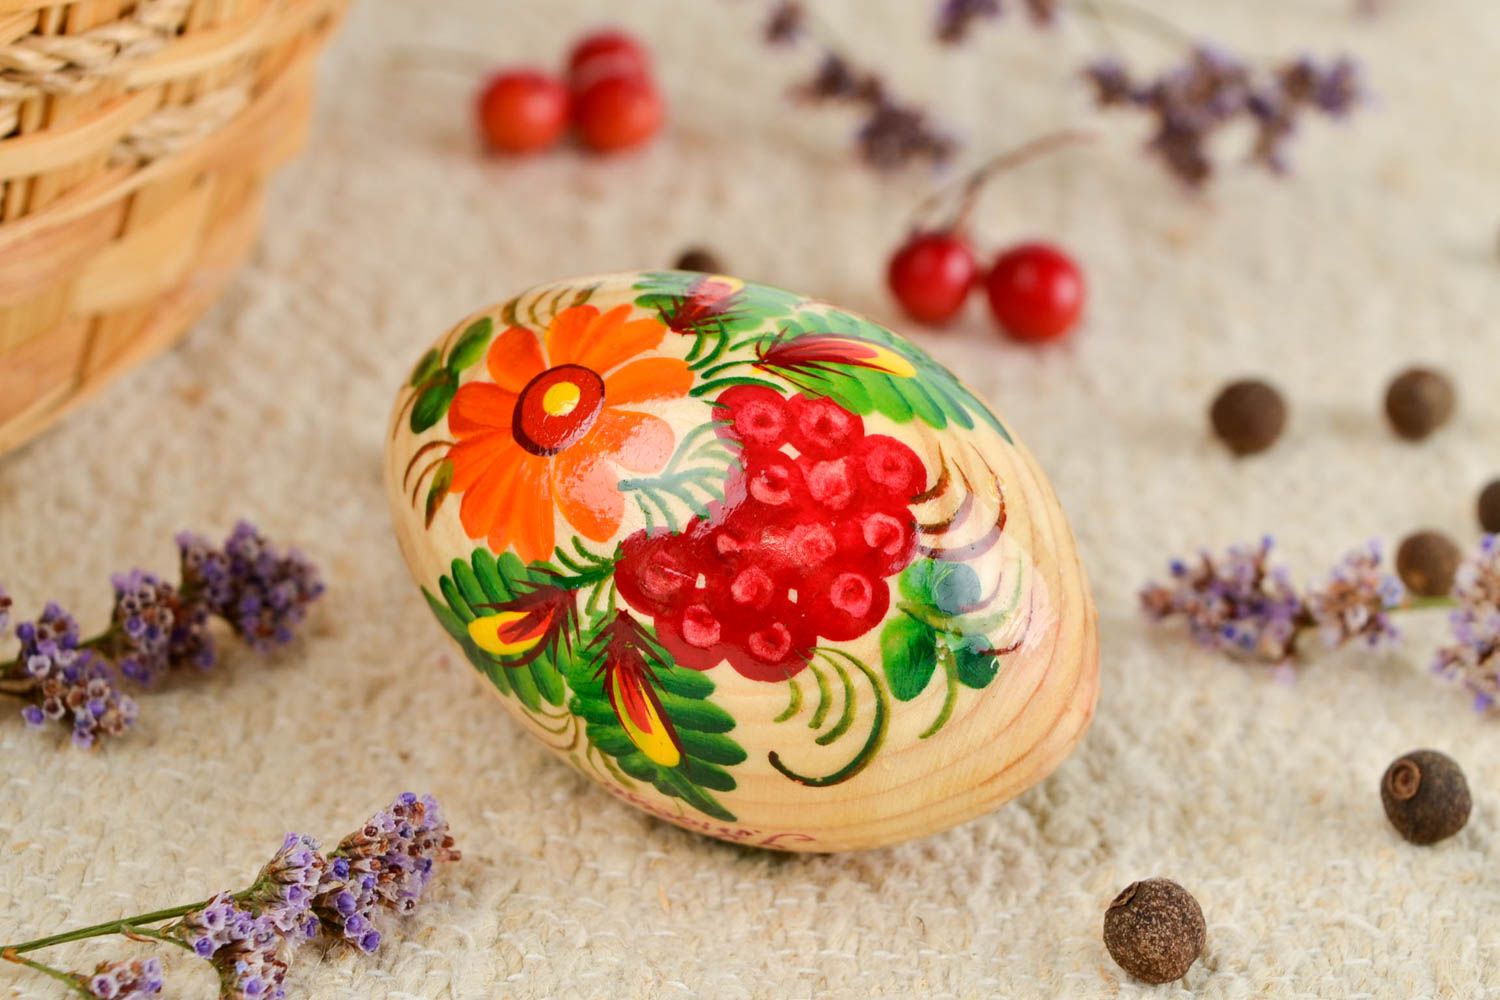 Handmade decorative Easter egg wooden Easter egg gift ideas decorative use only photo 1